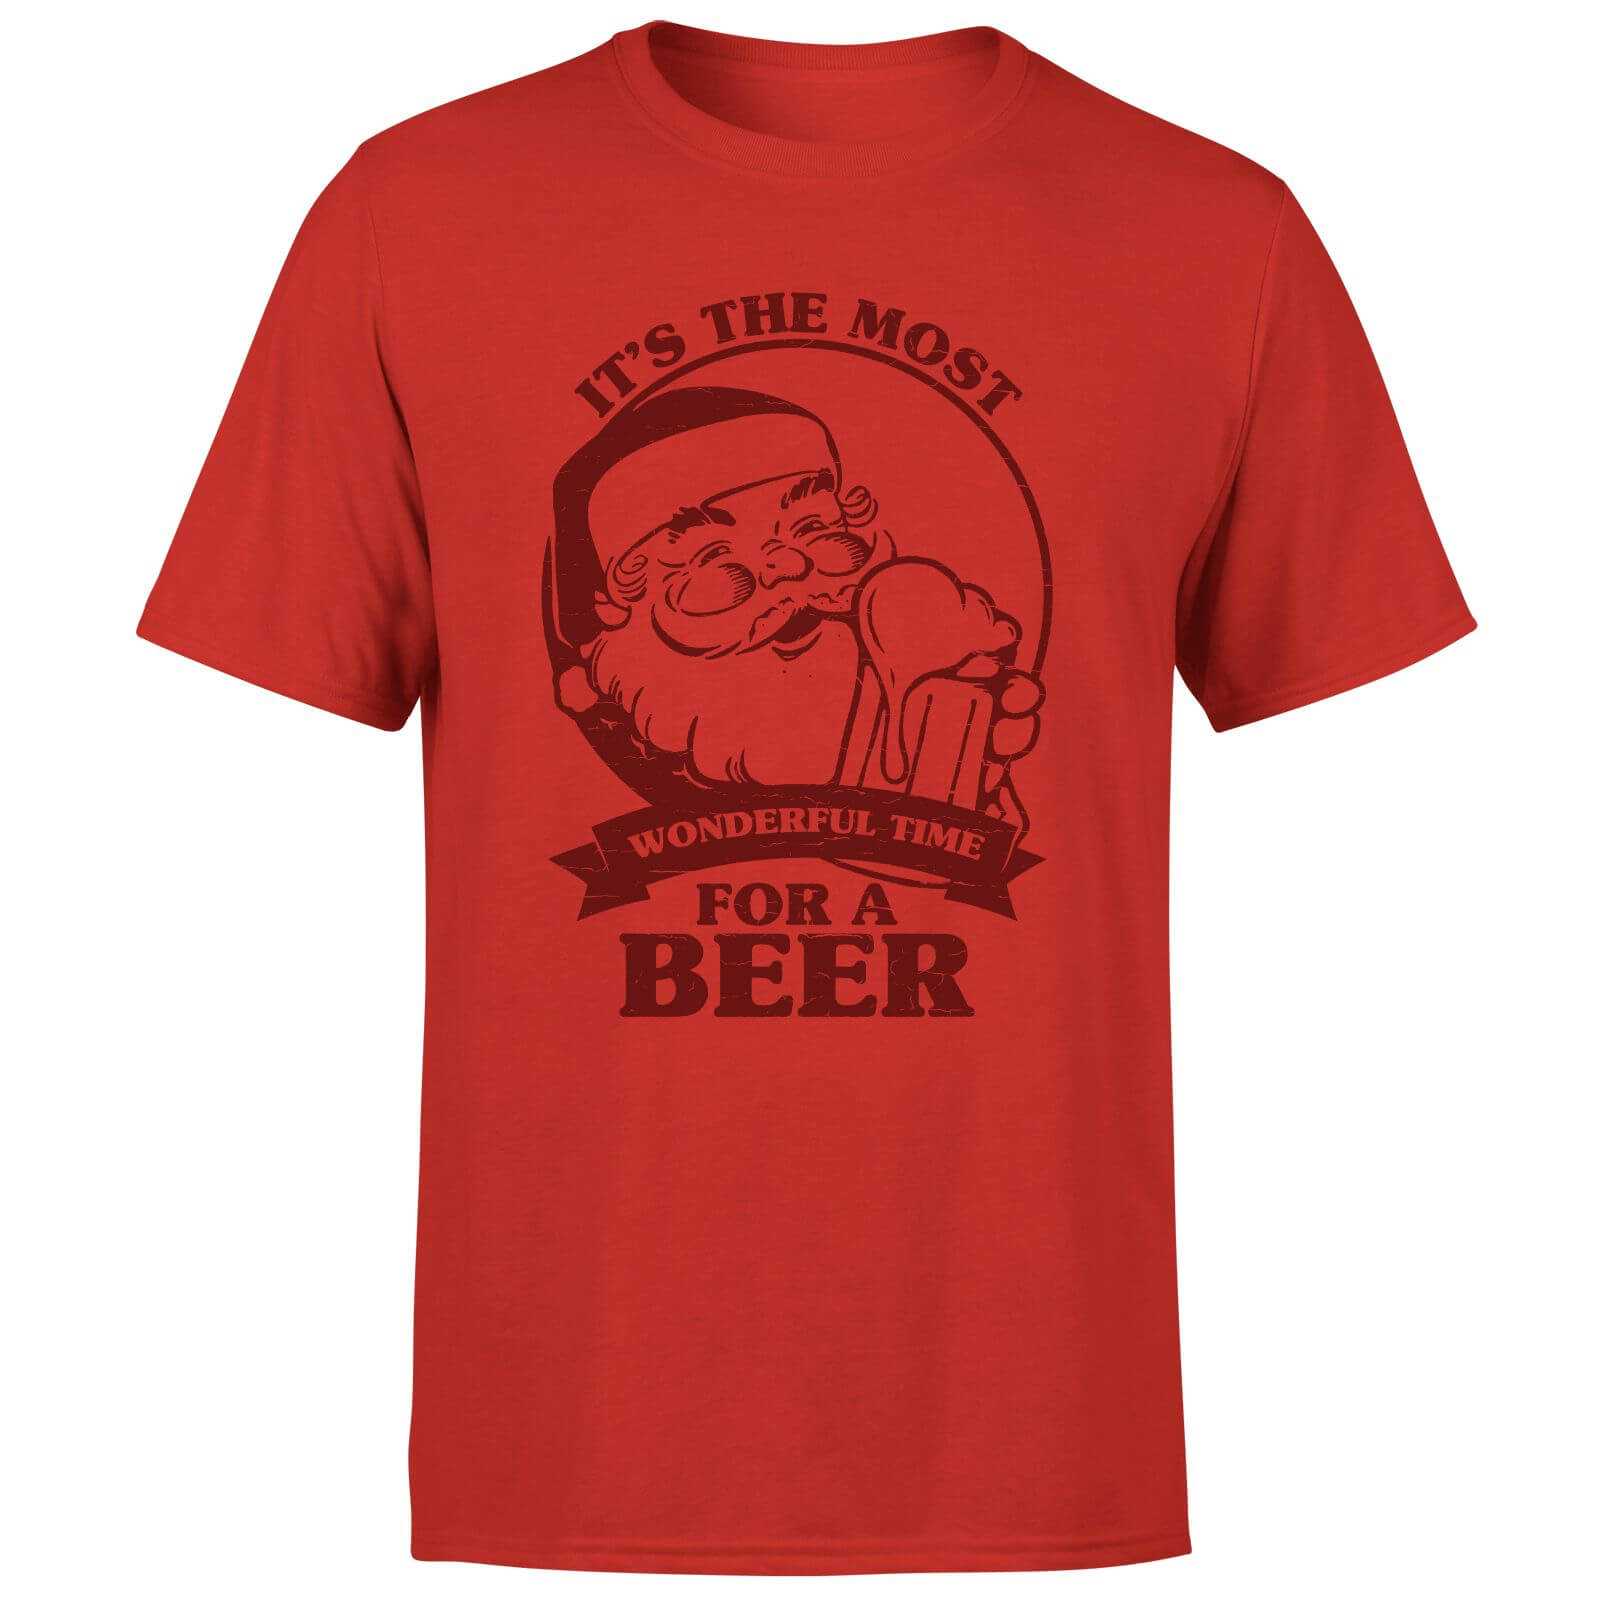 The Most Wonderful Time For A Beer T-Shirt - Red - S